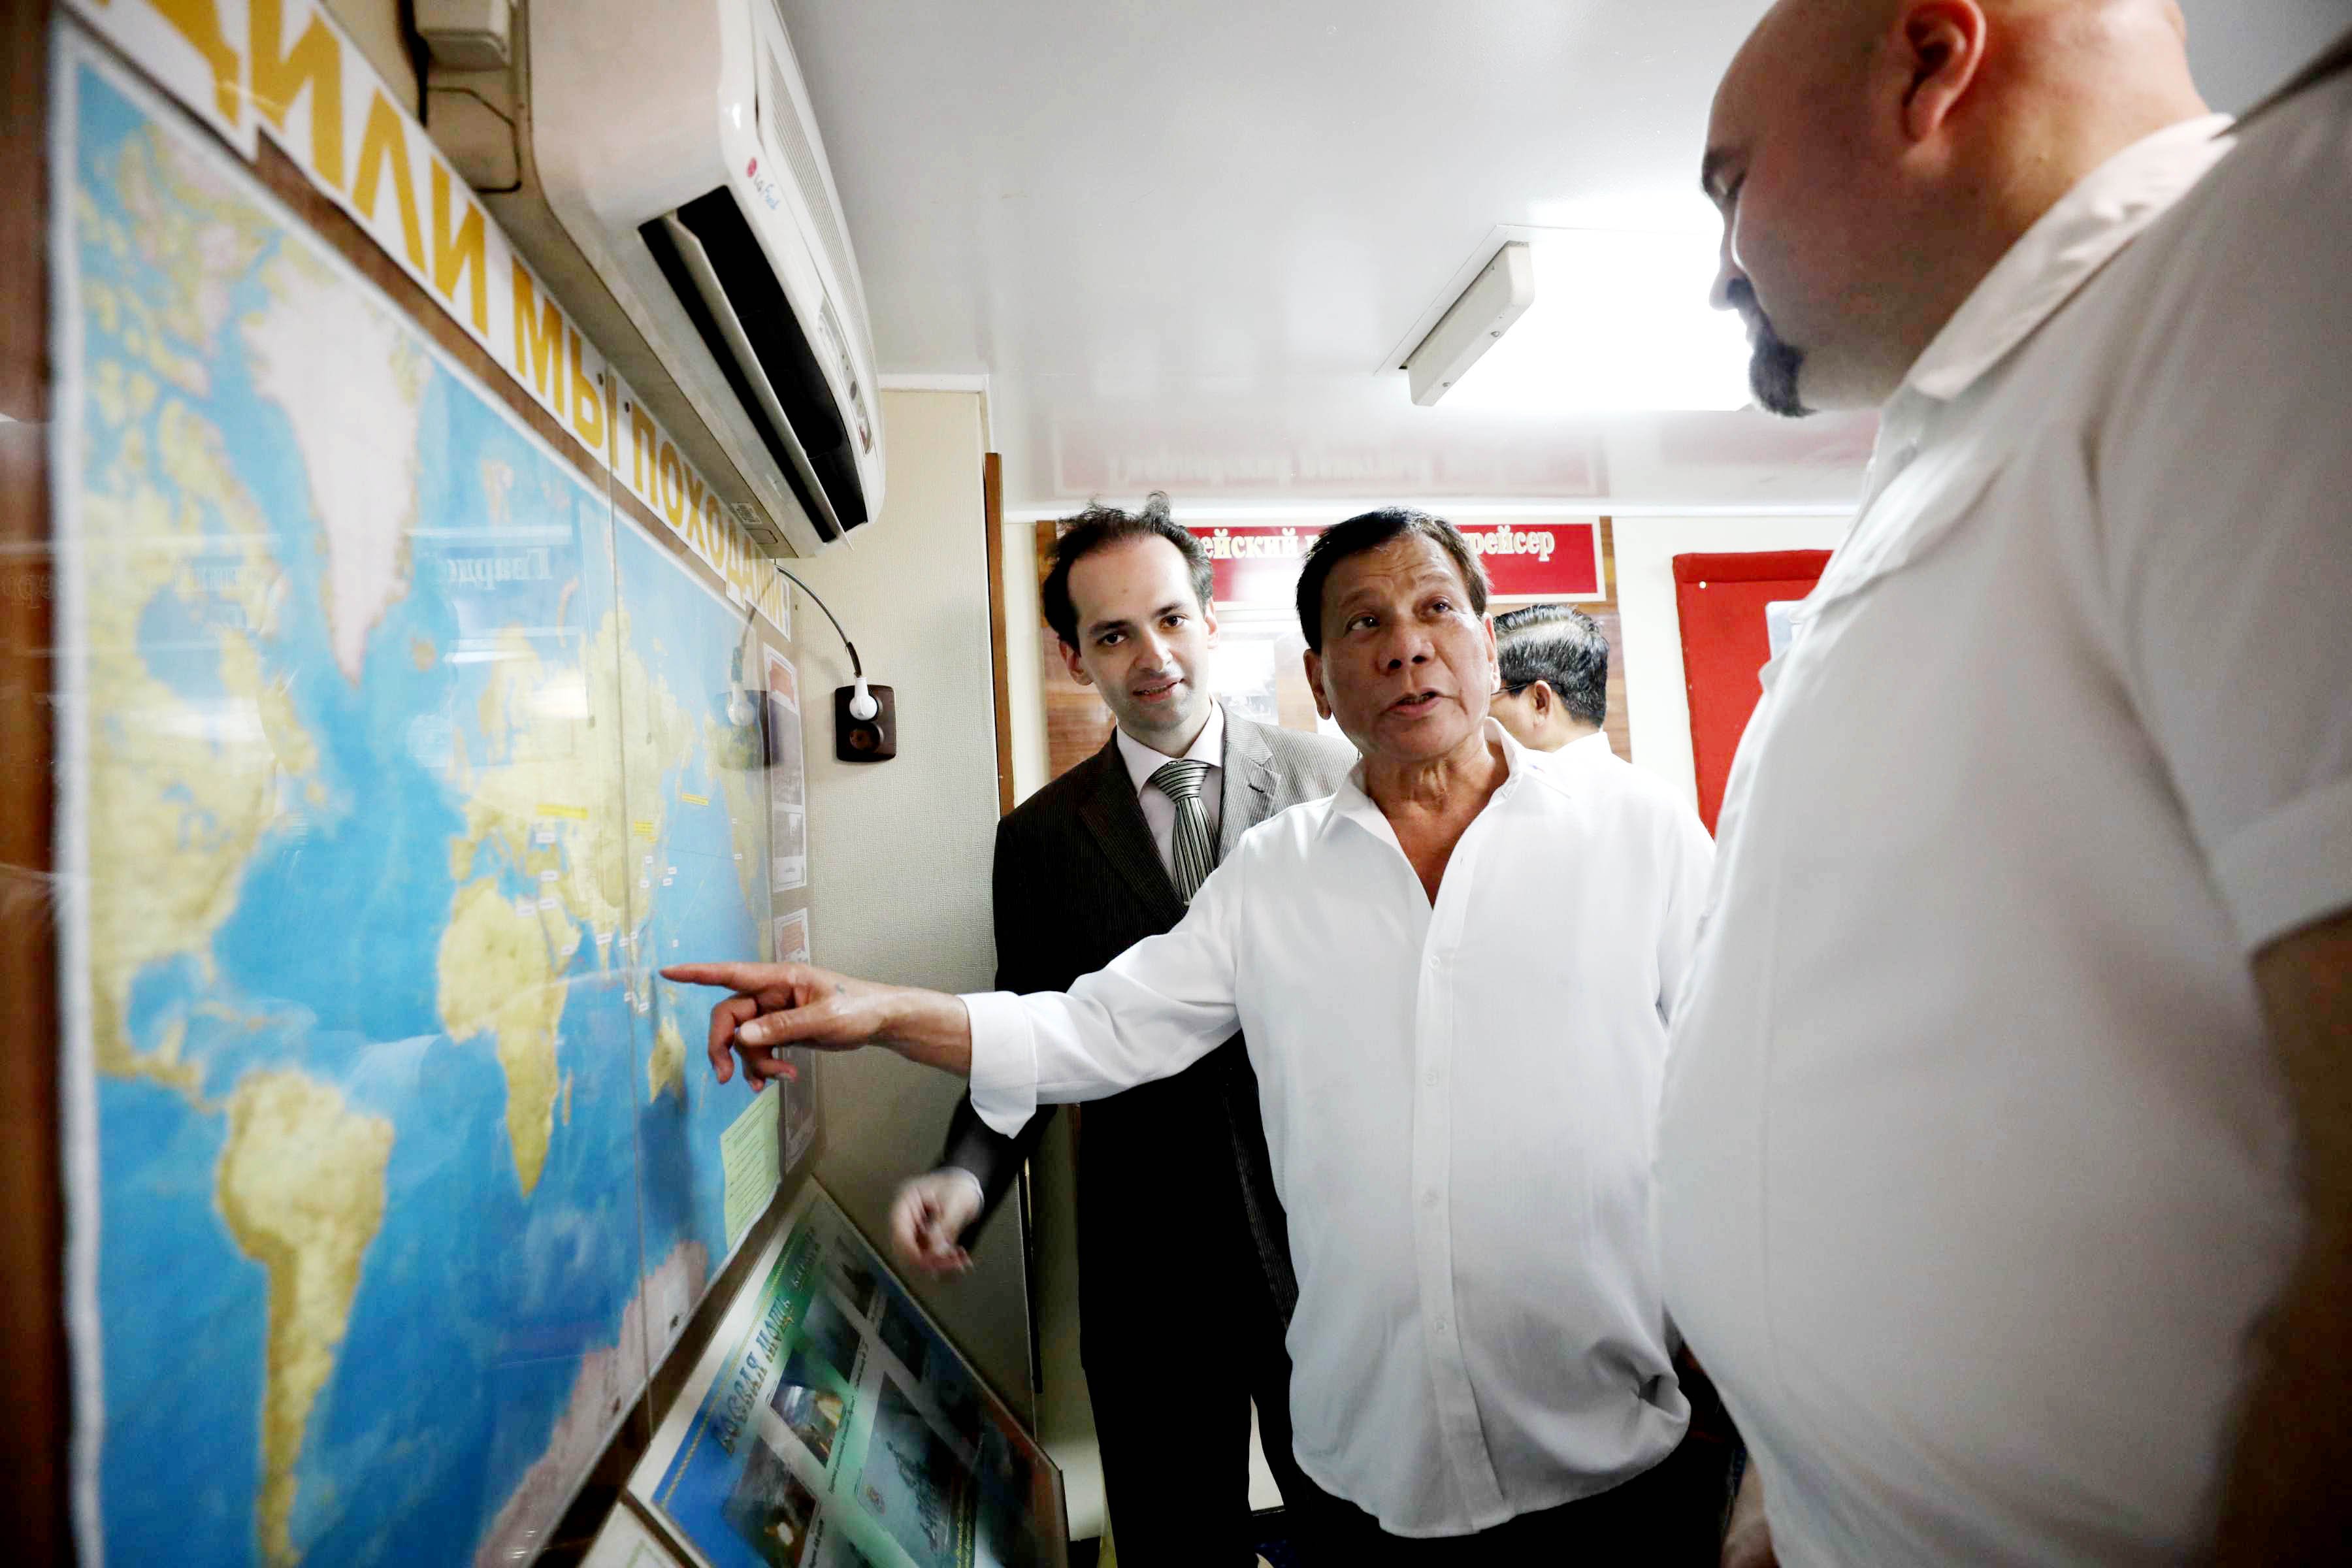 Pres. Duterte is given a tour while on board the Russian Guided Missile Cruiser "Varyag”